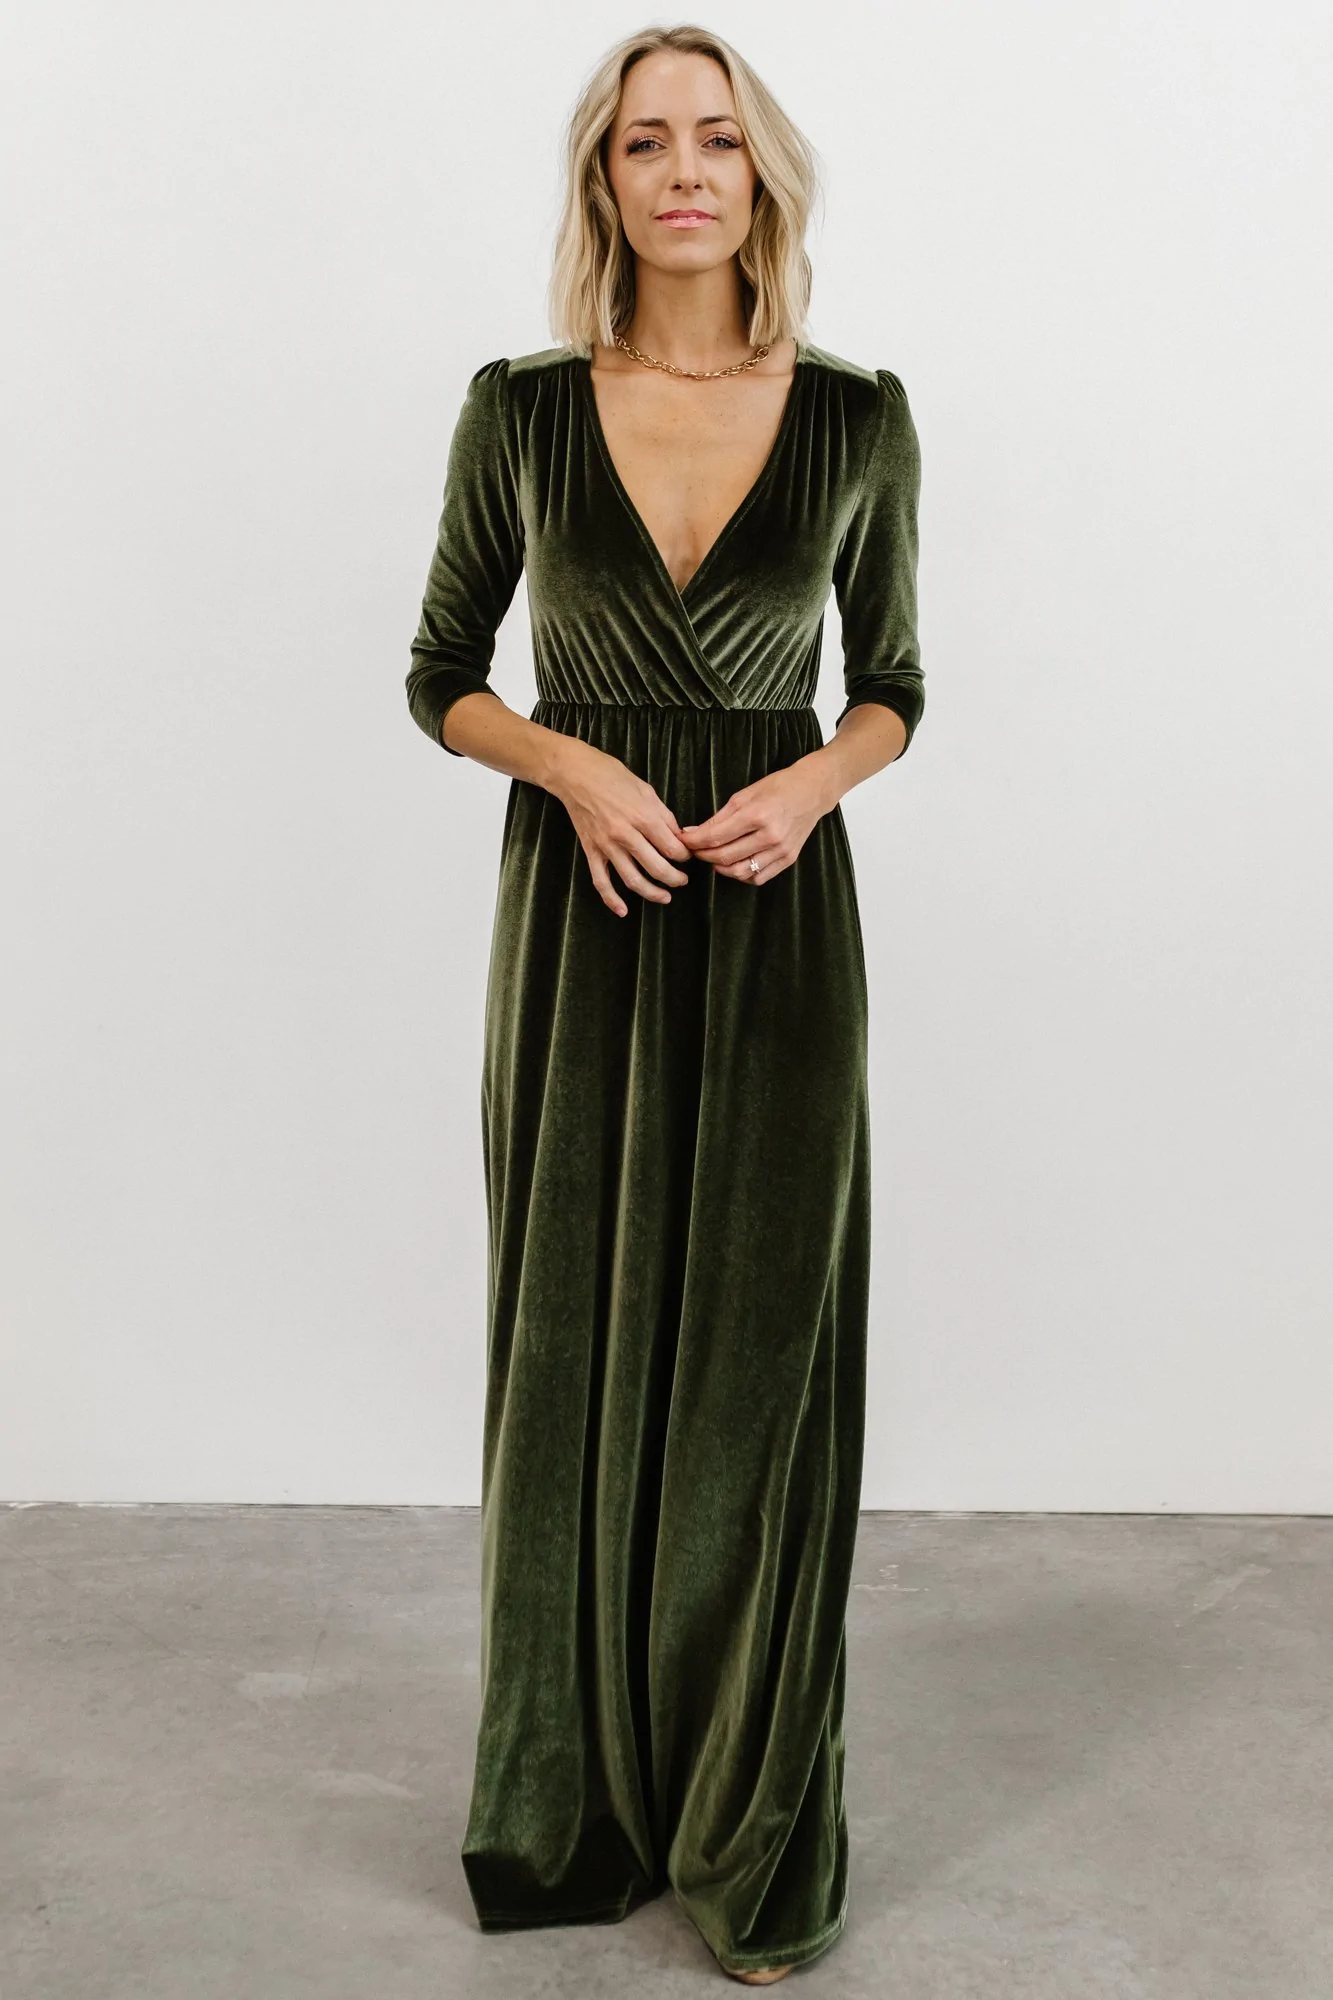 Olive green velvet bridesmaid dress with elbow length sleeves